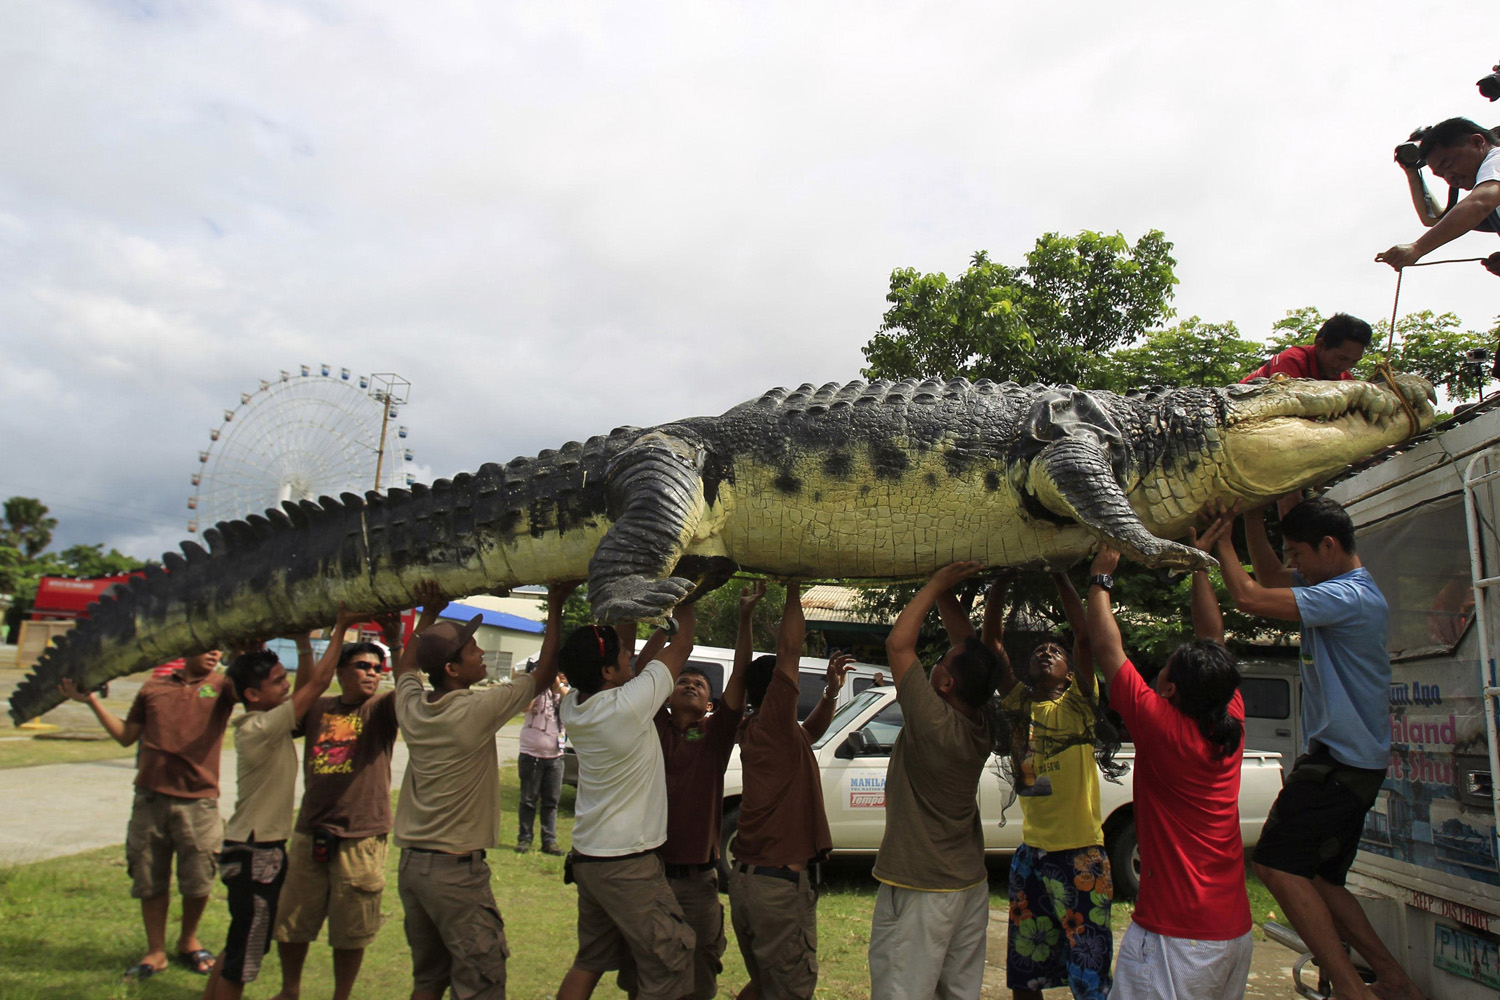 Workers carefully unload 21-foot crocodile robot "Longlong" from the roof of a van, in Crocodile Park in Pasay city, Philippines on July 5, 2014.